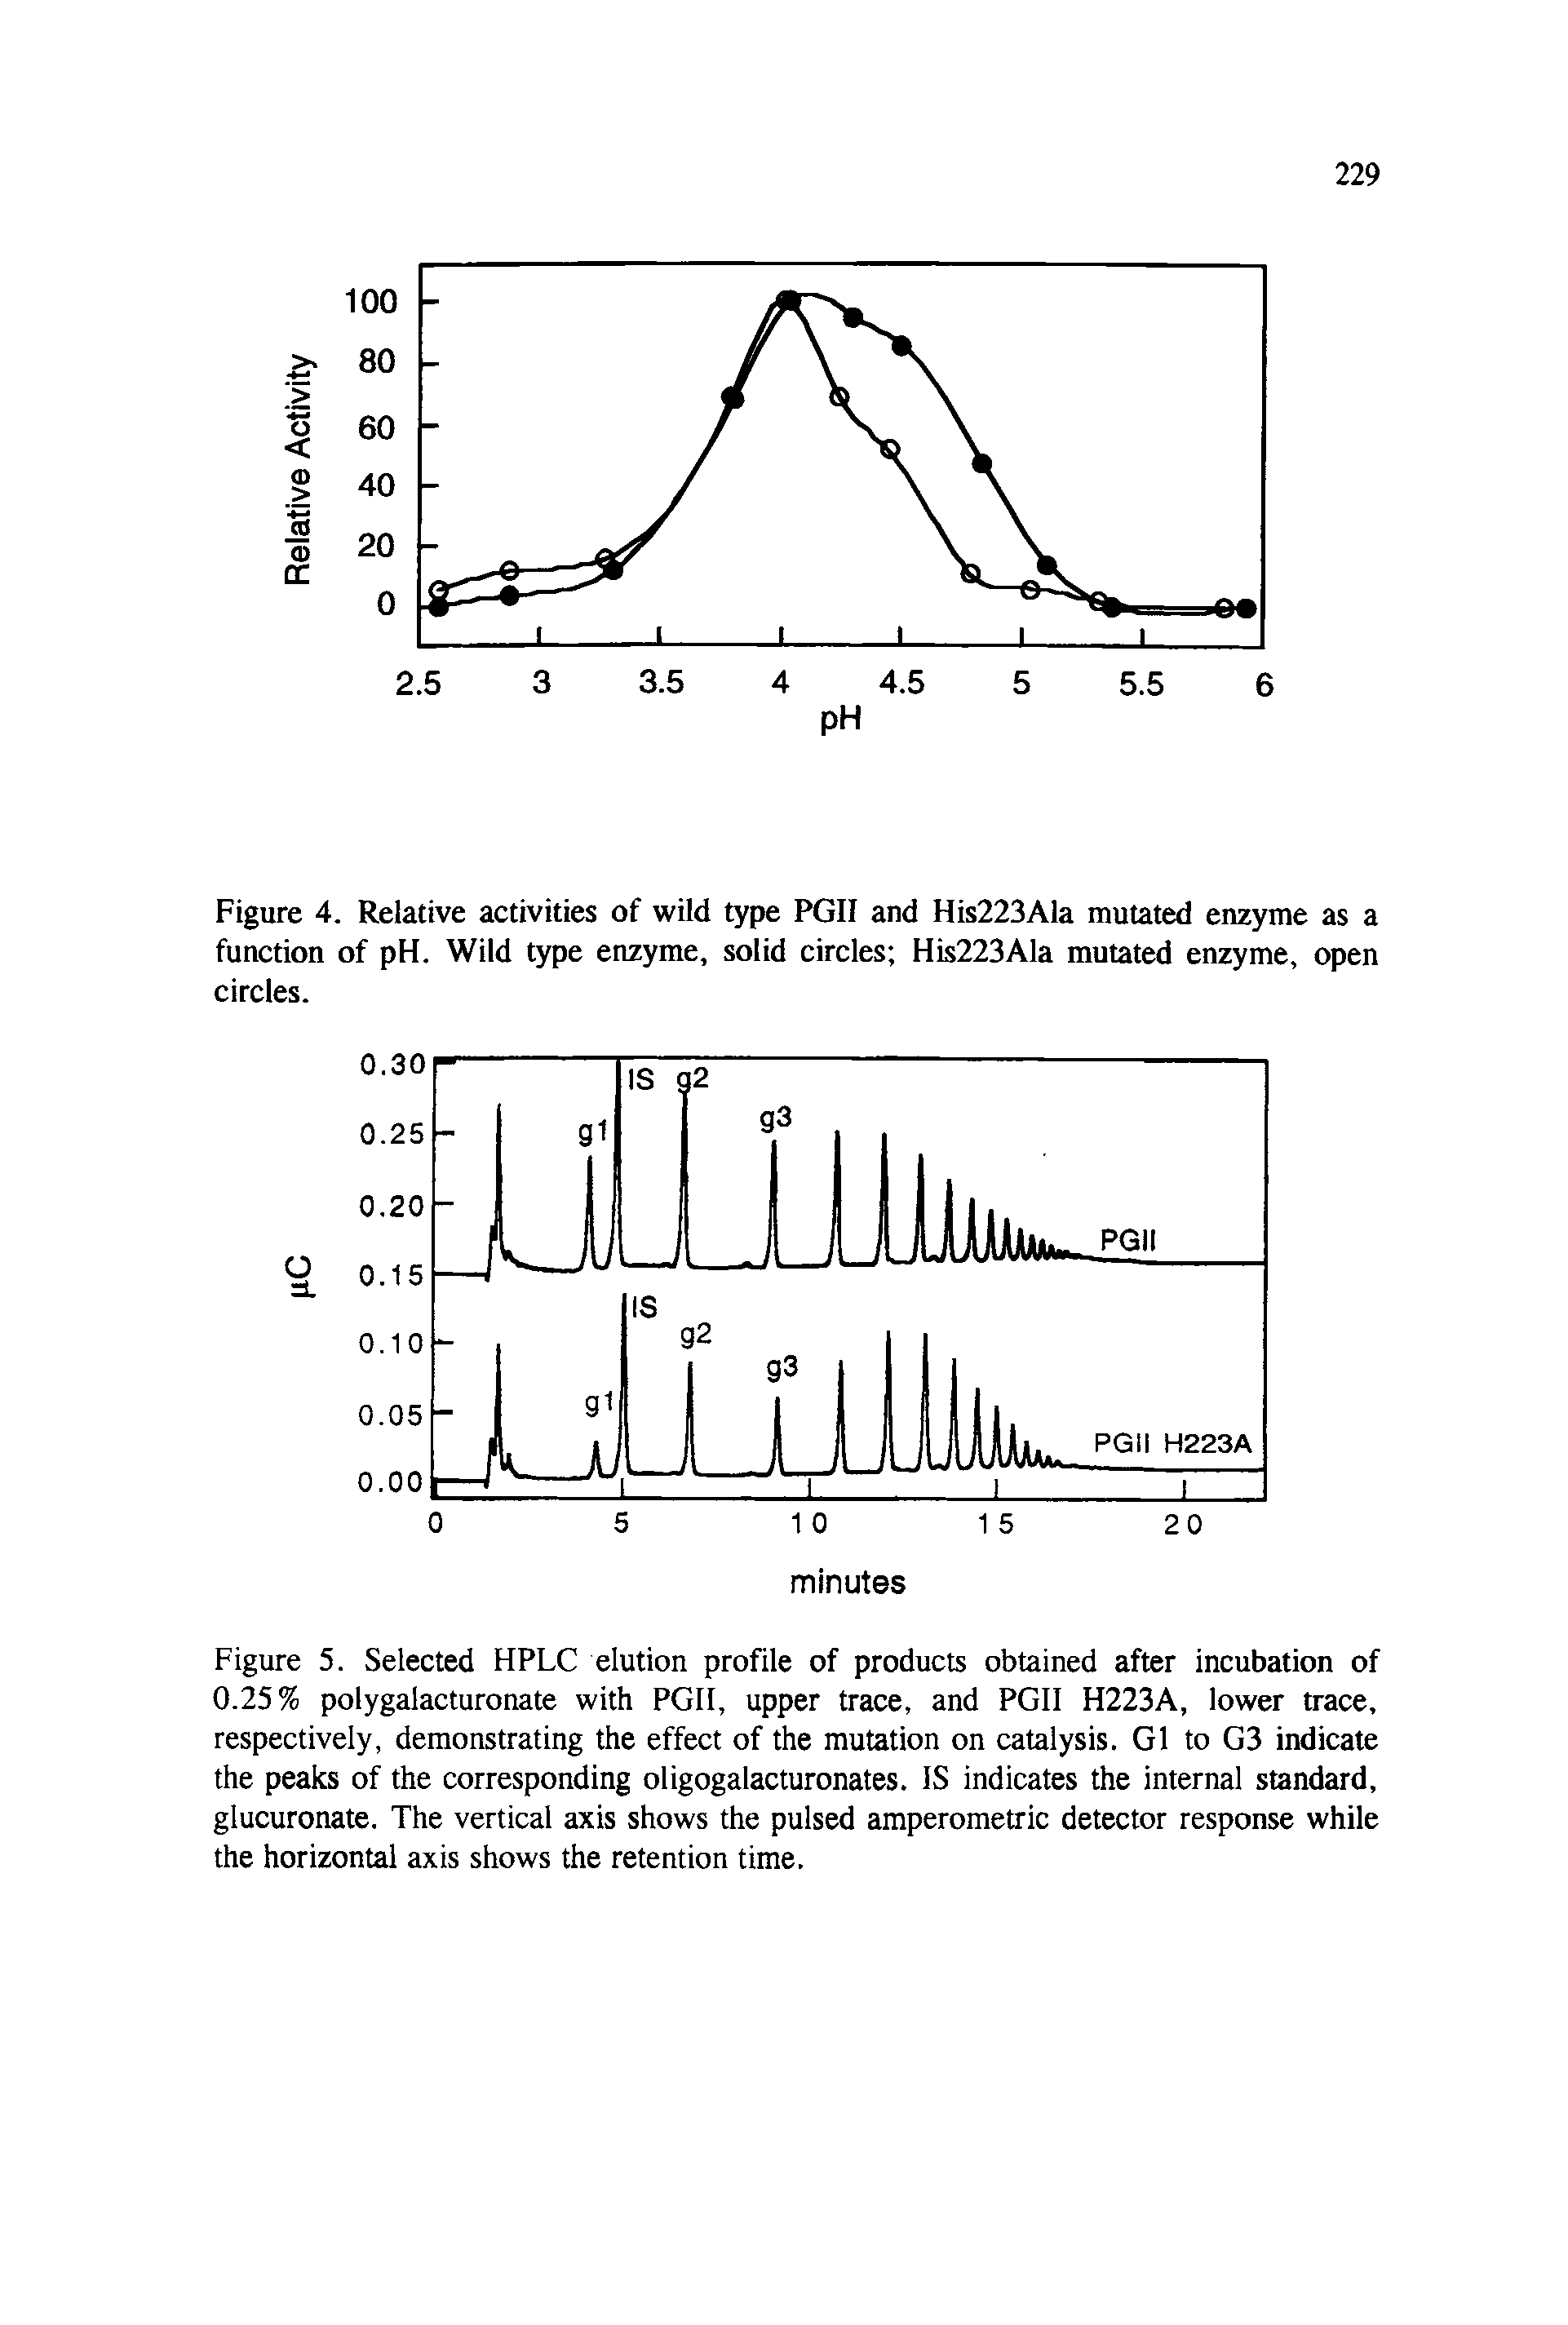 Figure 5. Selected HPLC elution profile of products obtained after incubation of 0.25% polygalacturonate with PGII, upper trace, and PGII H223A, lower trace, respectively, demonstrating the effect of the mutation on catalysis. G1 to G3 indicate the peaks of the corresponding oligogalacturonates. IS indicates the internal standard, glucuronate. The vertical axis shows the pulsed amperometric detector response while the horizontal axis shows the retention time.